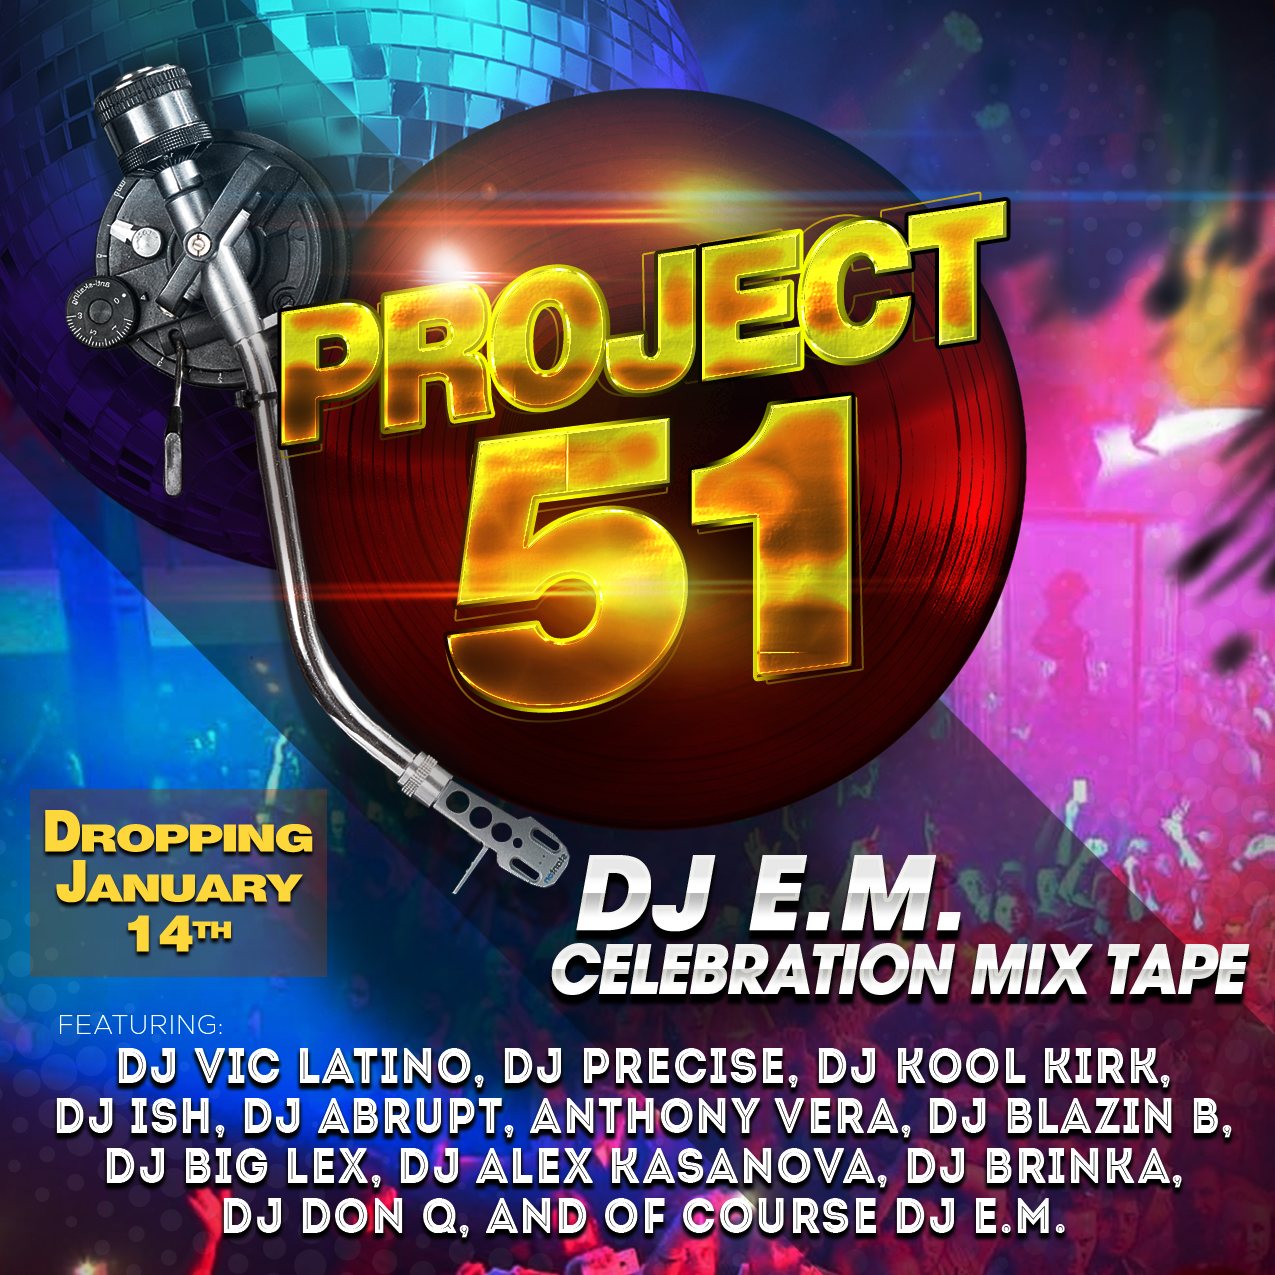 Download your Free Copy of Project 51 
by DJ E.M.